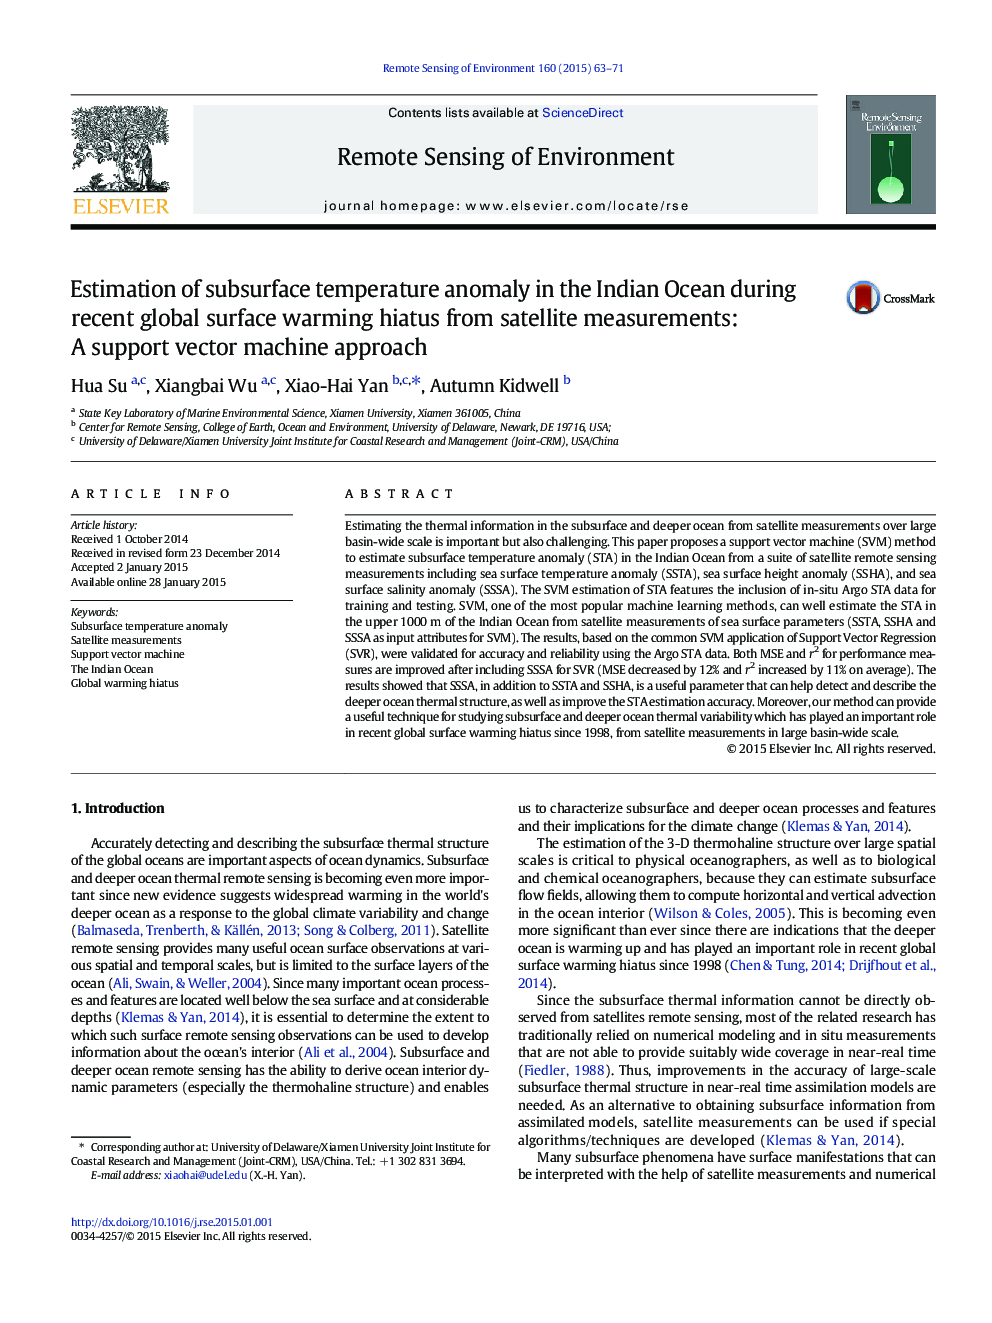 Estimation of subsurface temperature anomaly in the Indian Ocean during recent global surface warming hiatus from satellite measurements: A support vector machine approach